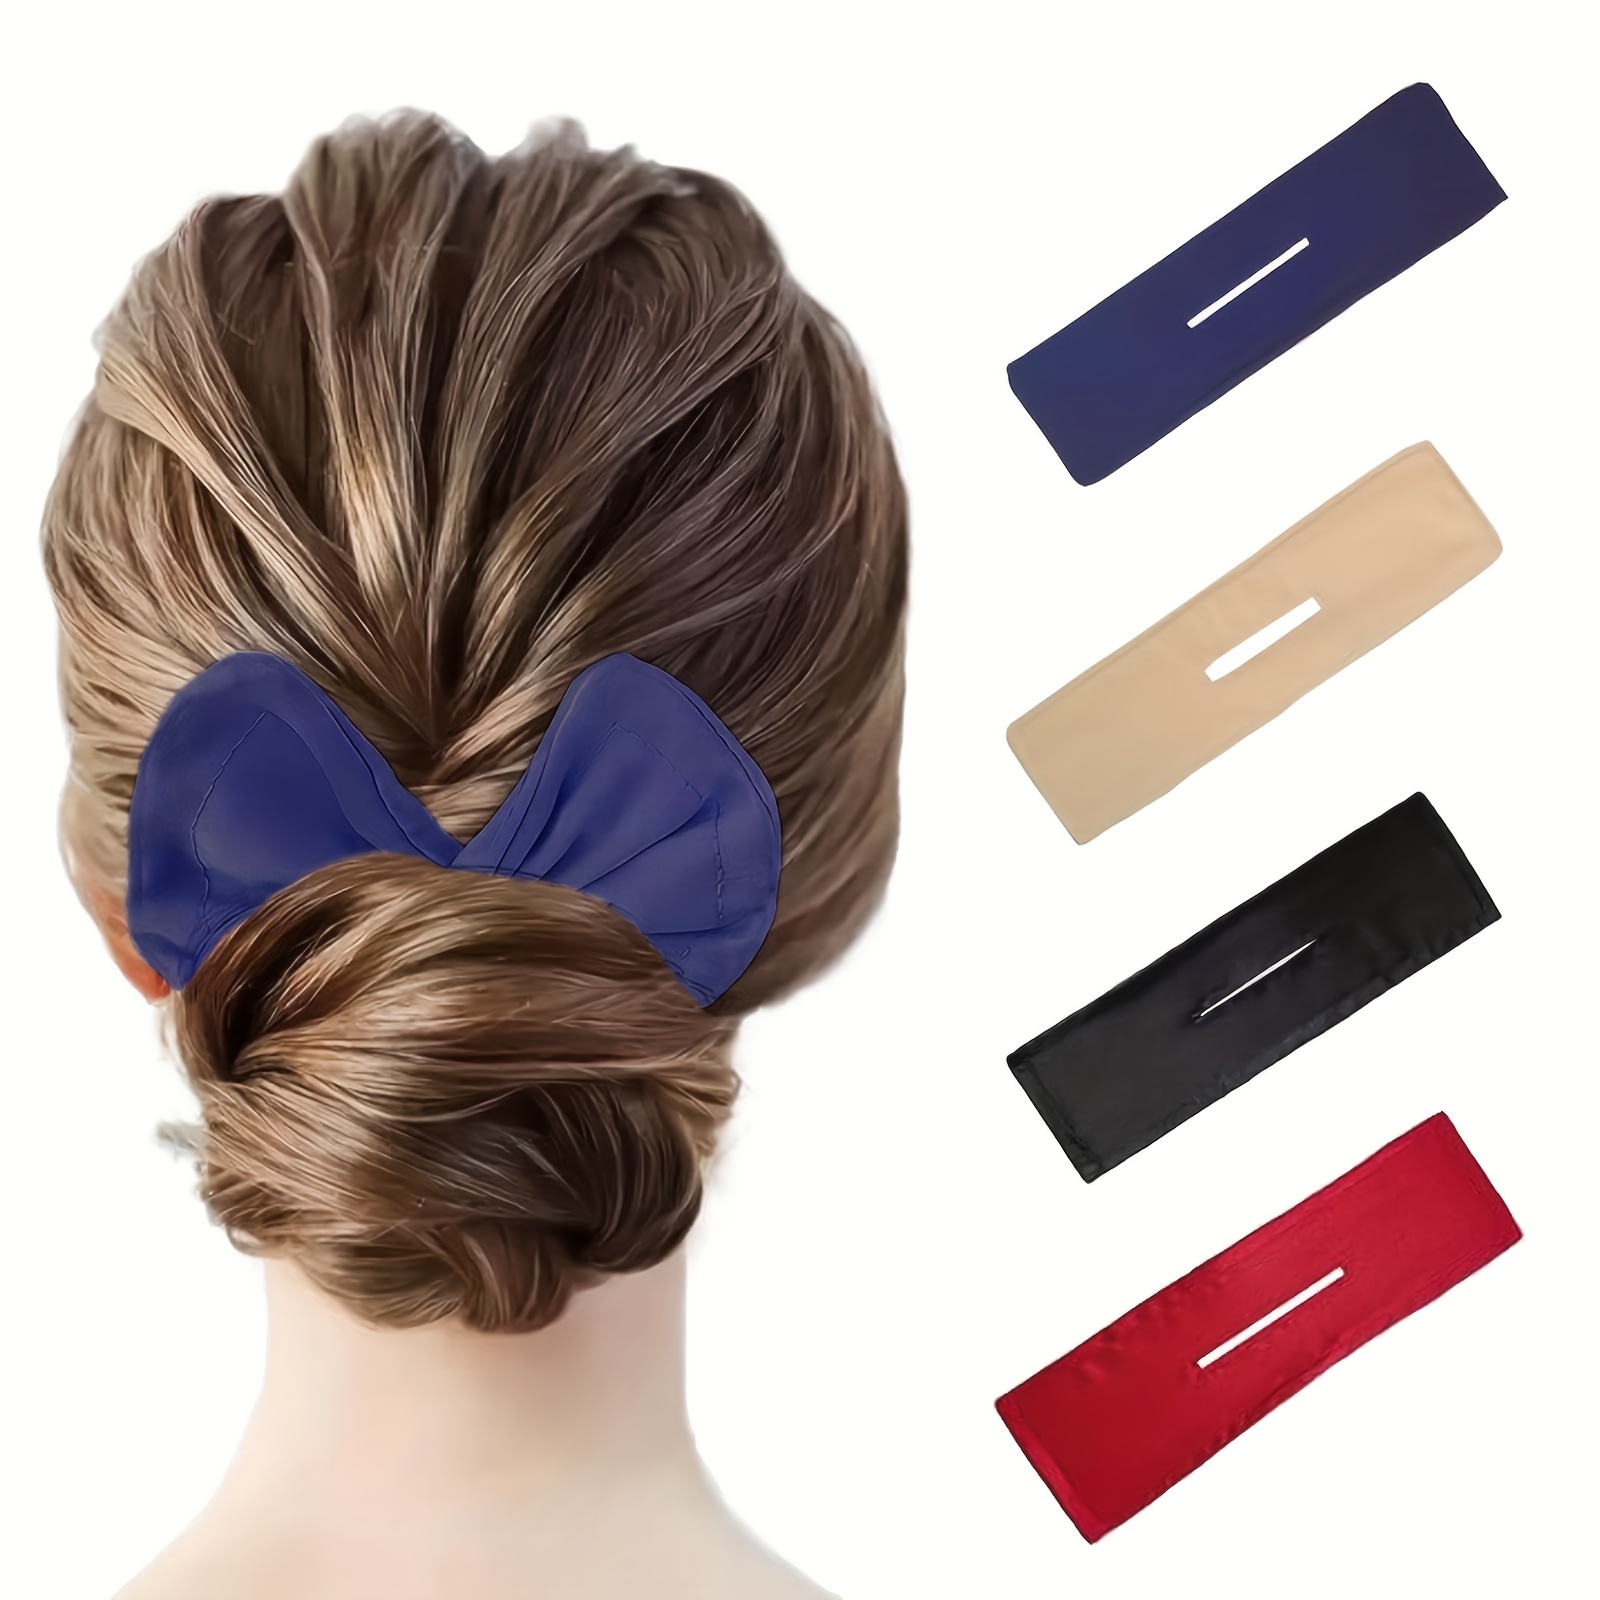 

4-pack Hair Bun Maker Set Magic French Twist Hair Clip Bands Women's Versatile Hairstyle Accessories In Assorted Colors